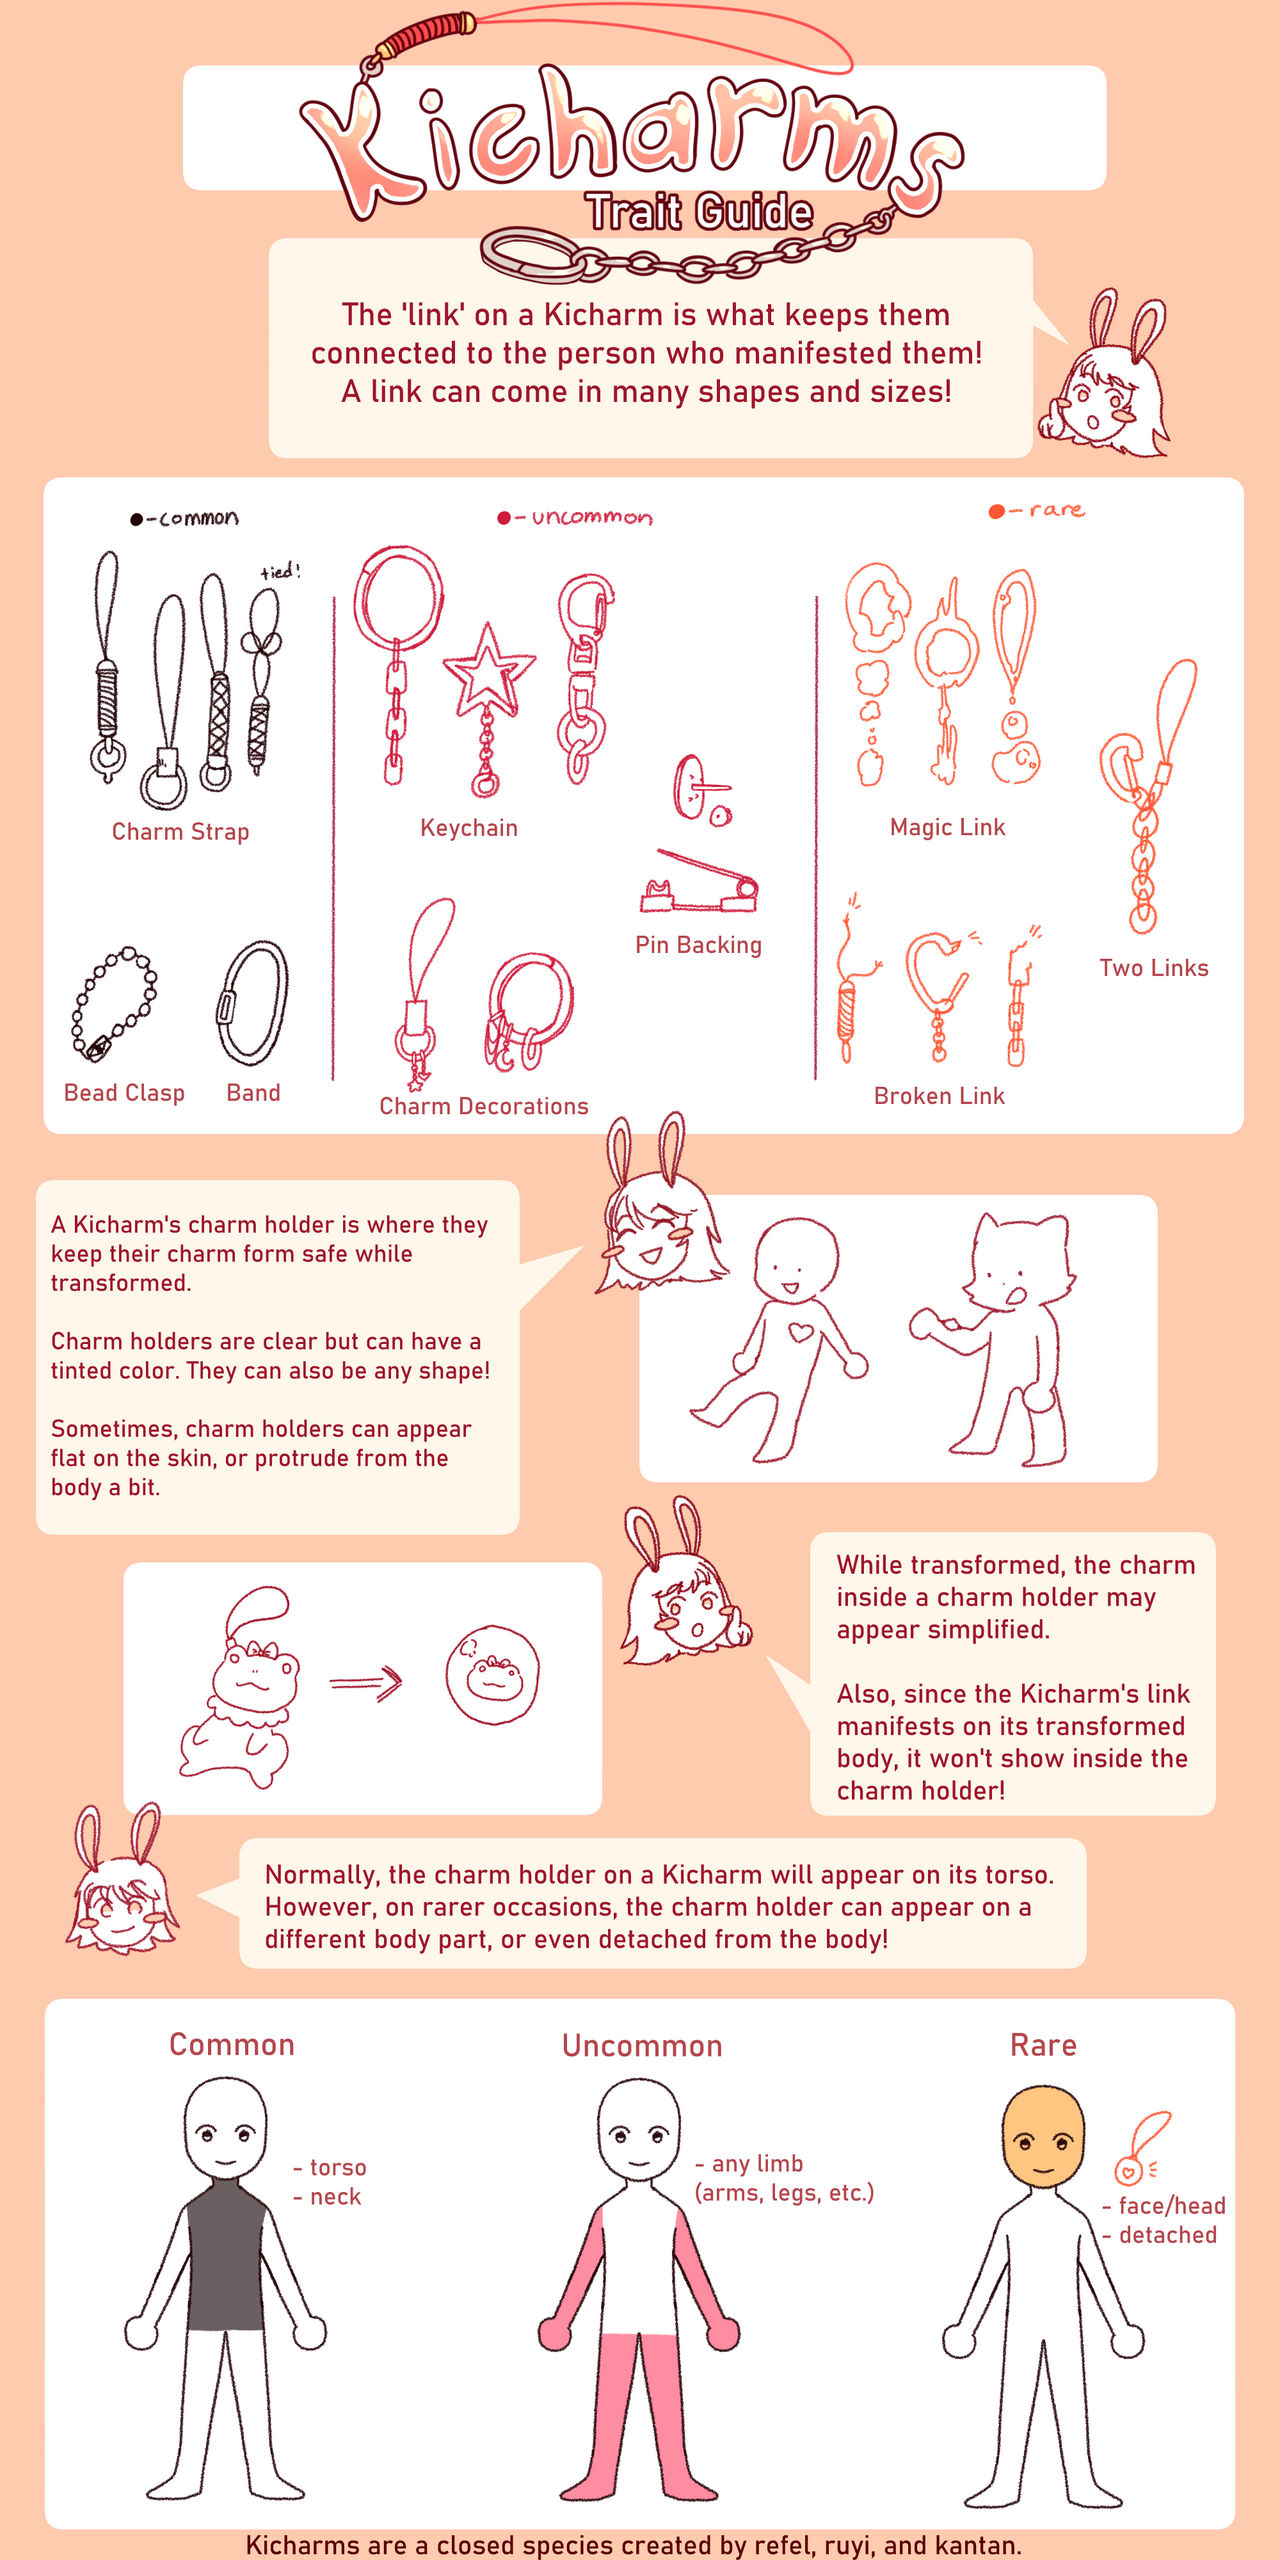 kicharms__trait_guide__edited_9_8_21__by